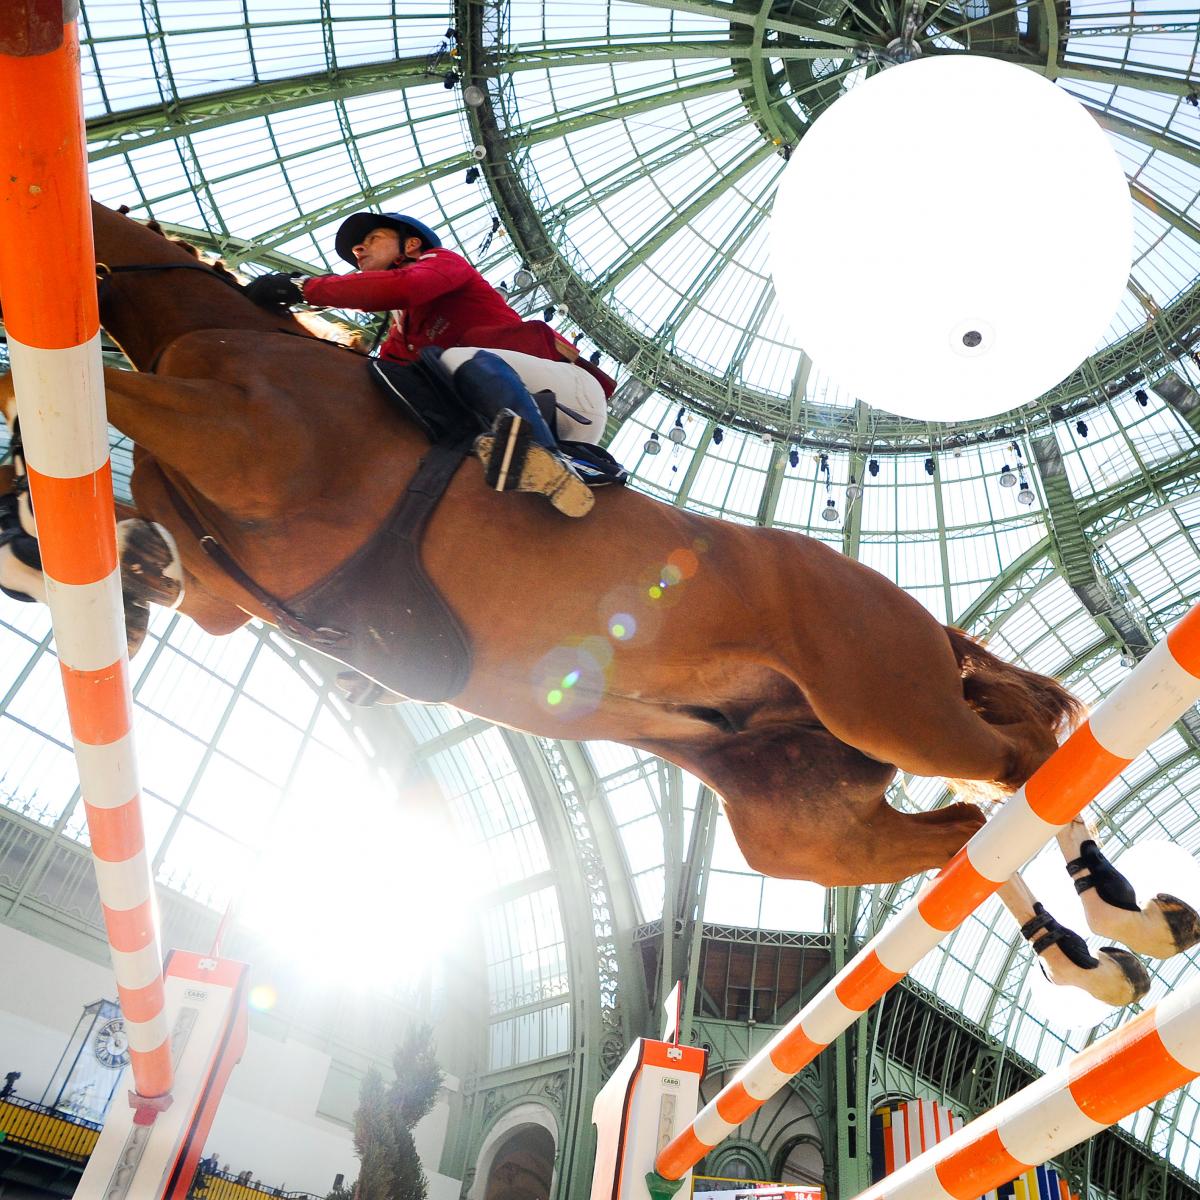 Show Jumping World Cup Final 2014 Daily Results and Recap News